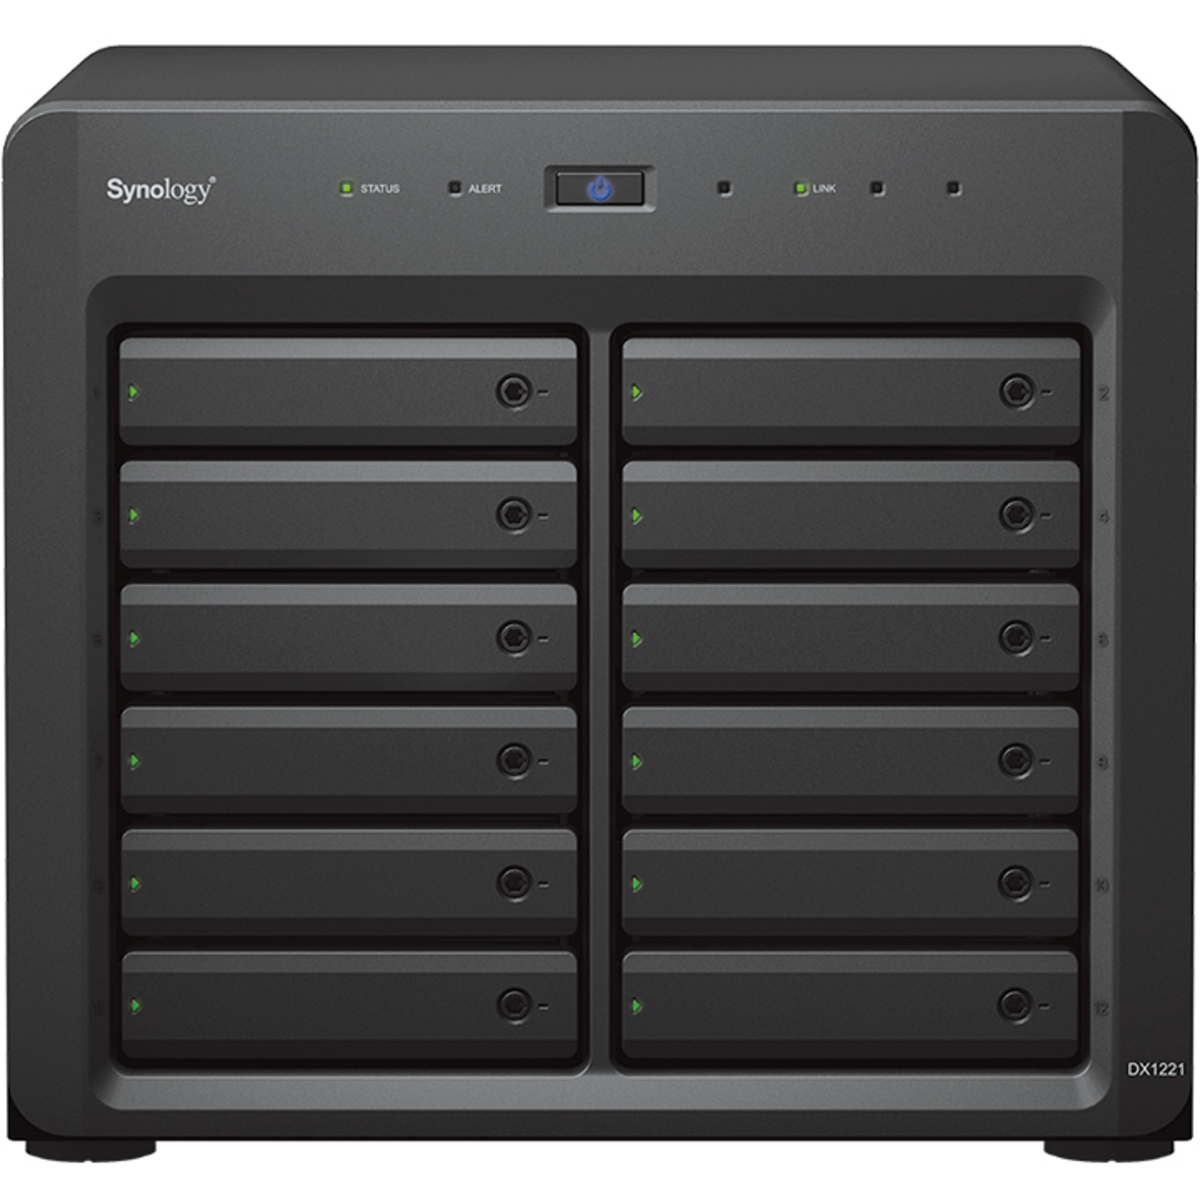 Synology DX1222 External Expansion Drive 48tb 12-Bay Desktop Multimedia / Power User / Business Expansion Enclosure 8x6tb Seagate EXOS 7E10 ST6000NM019B 3.5 7200rpm SATA 6Gb/s HDD ENTERPRISE Class Drives Installed - Burn-In Tested DX1222 External Expansion Drive